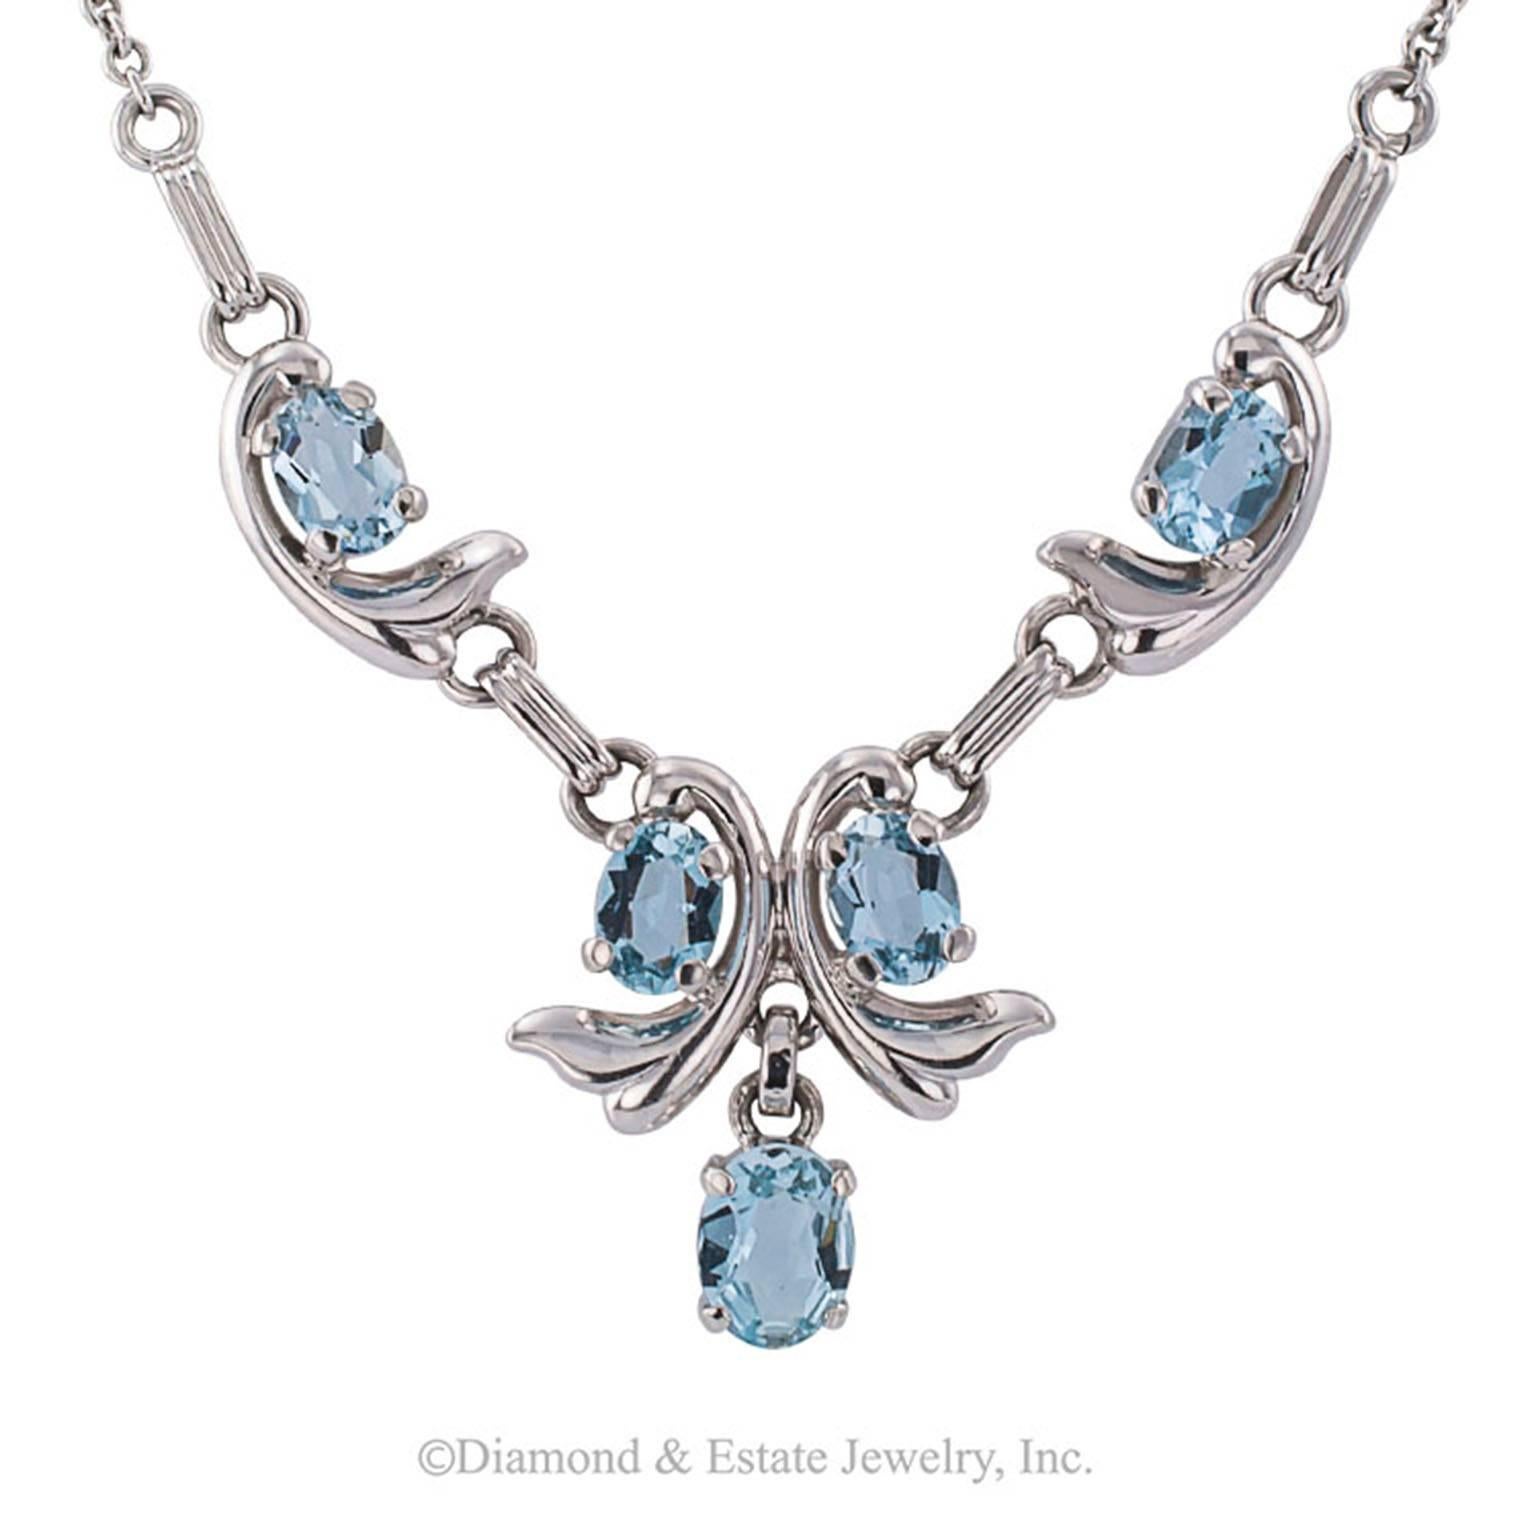 1950s Aquamarine White Gold Necklace

The front section set with five oval aquamarines totaling approximately 4.00 carats, mounted in 14-karat white gold, circa 1950.  Most definitely a wearable necklace, pretty.  If you are fond of aquamarine,